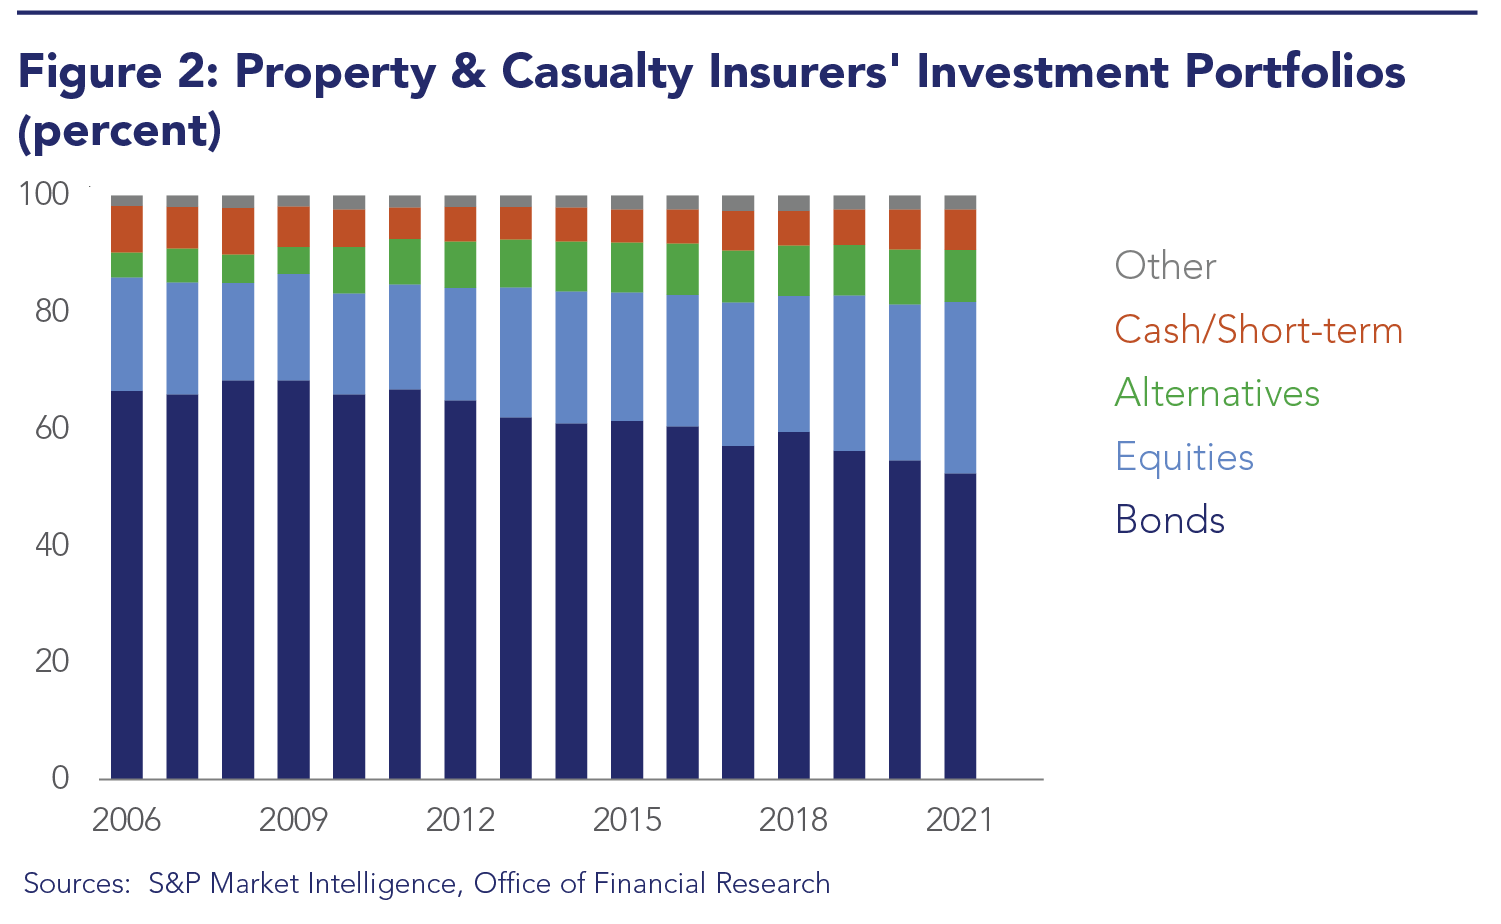 Property & Casualty Insurers' Investment Portfolios (percent)